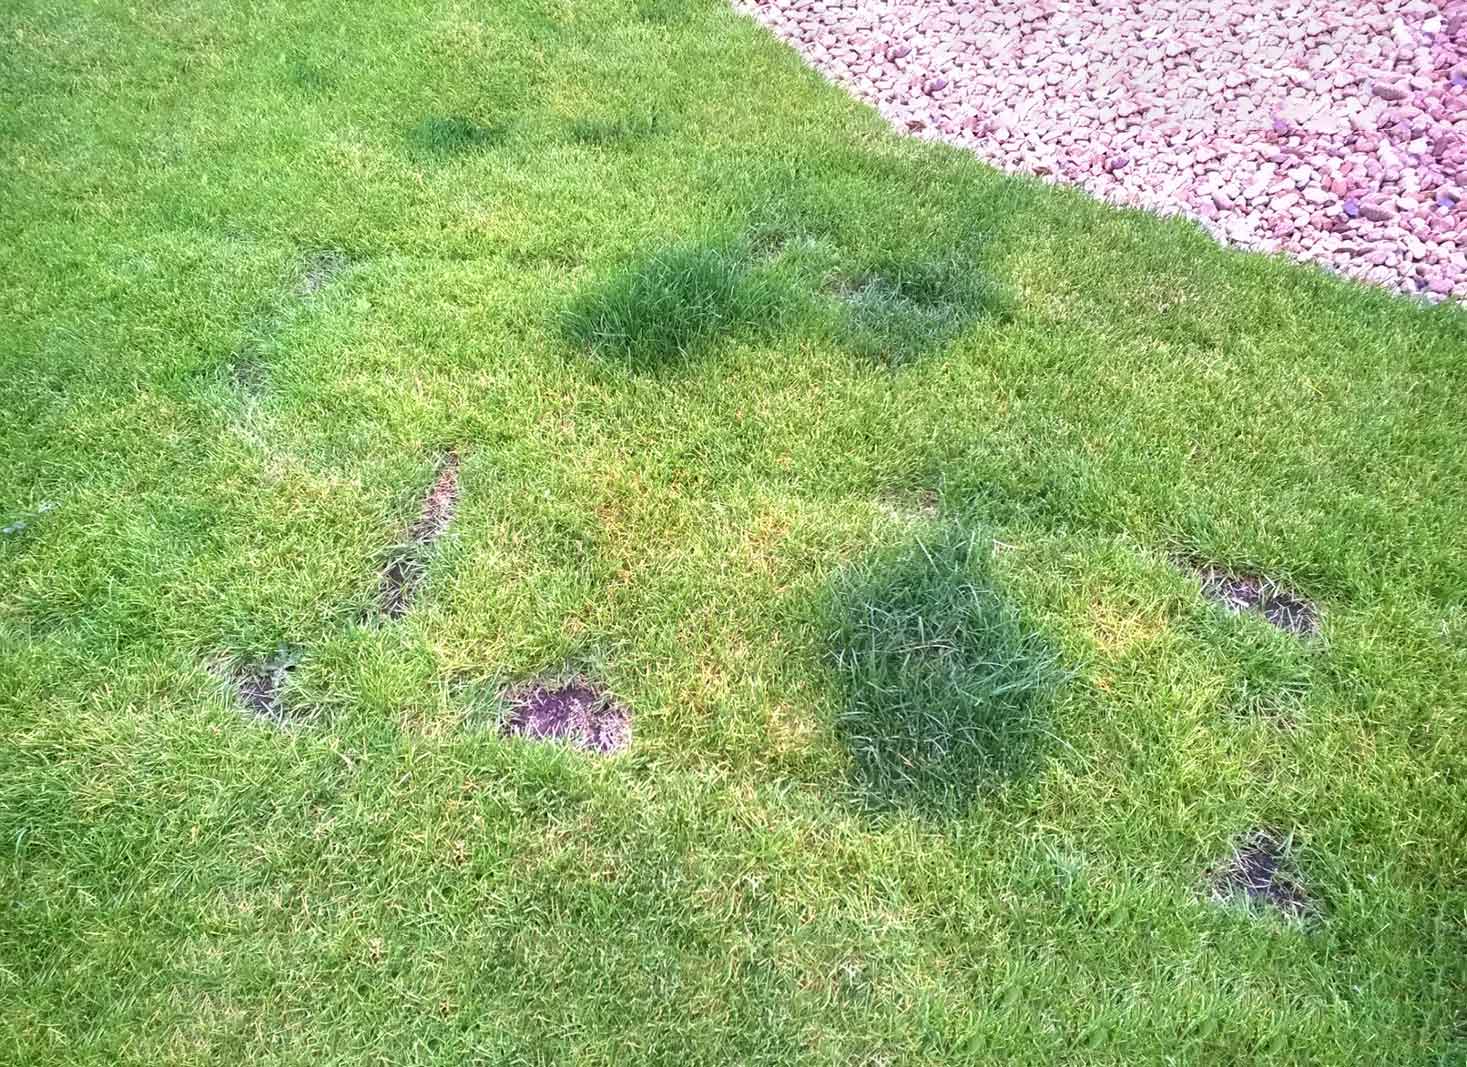 Common Causes of Light Green Grass Patches